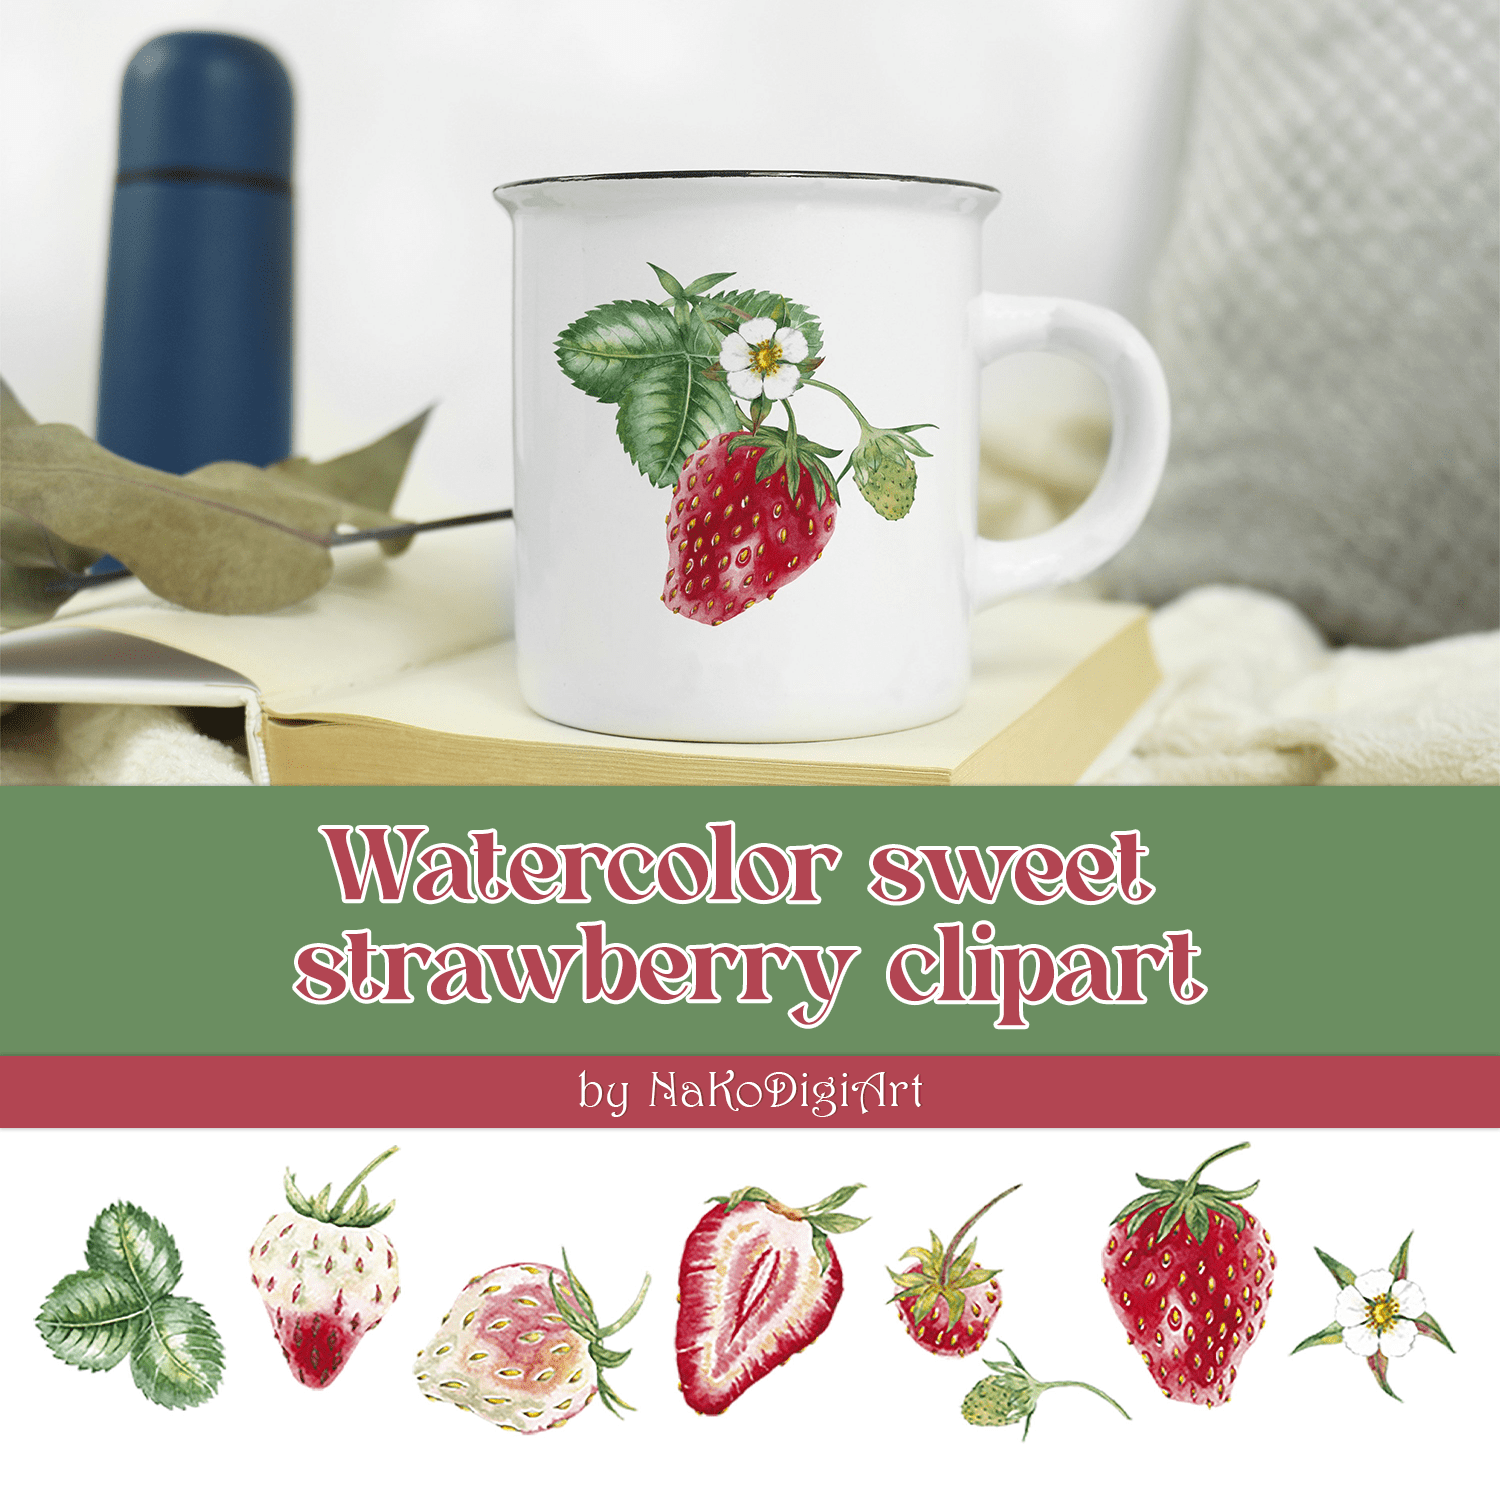 Watercolor Sweet Strawberry Clipart Created By NaKoDigiArt.